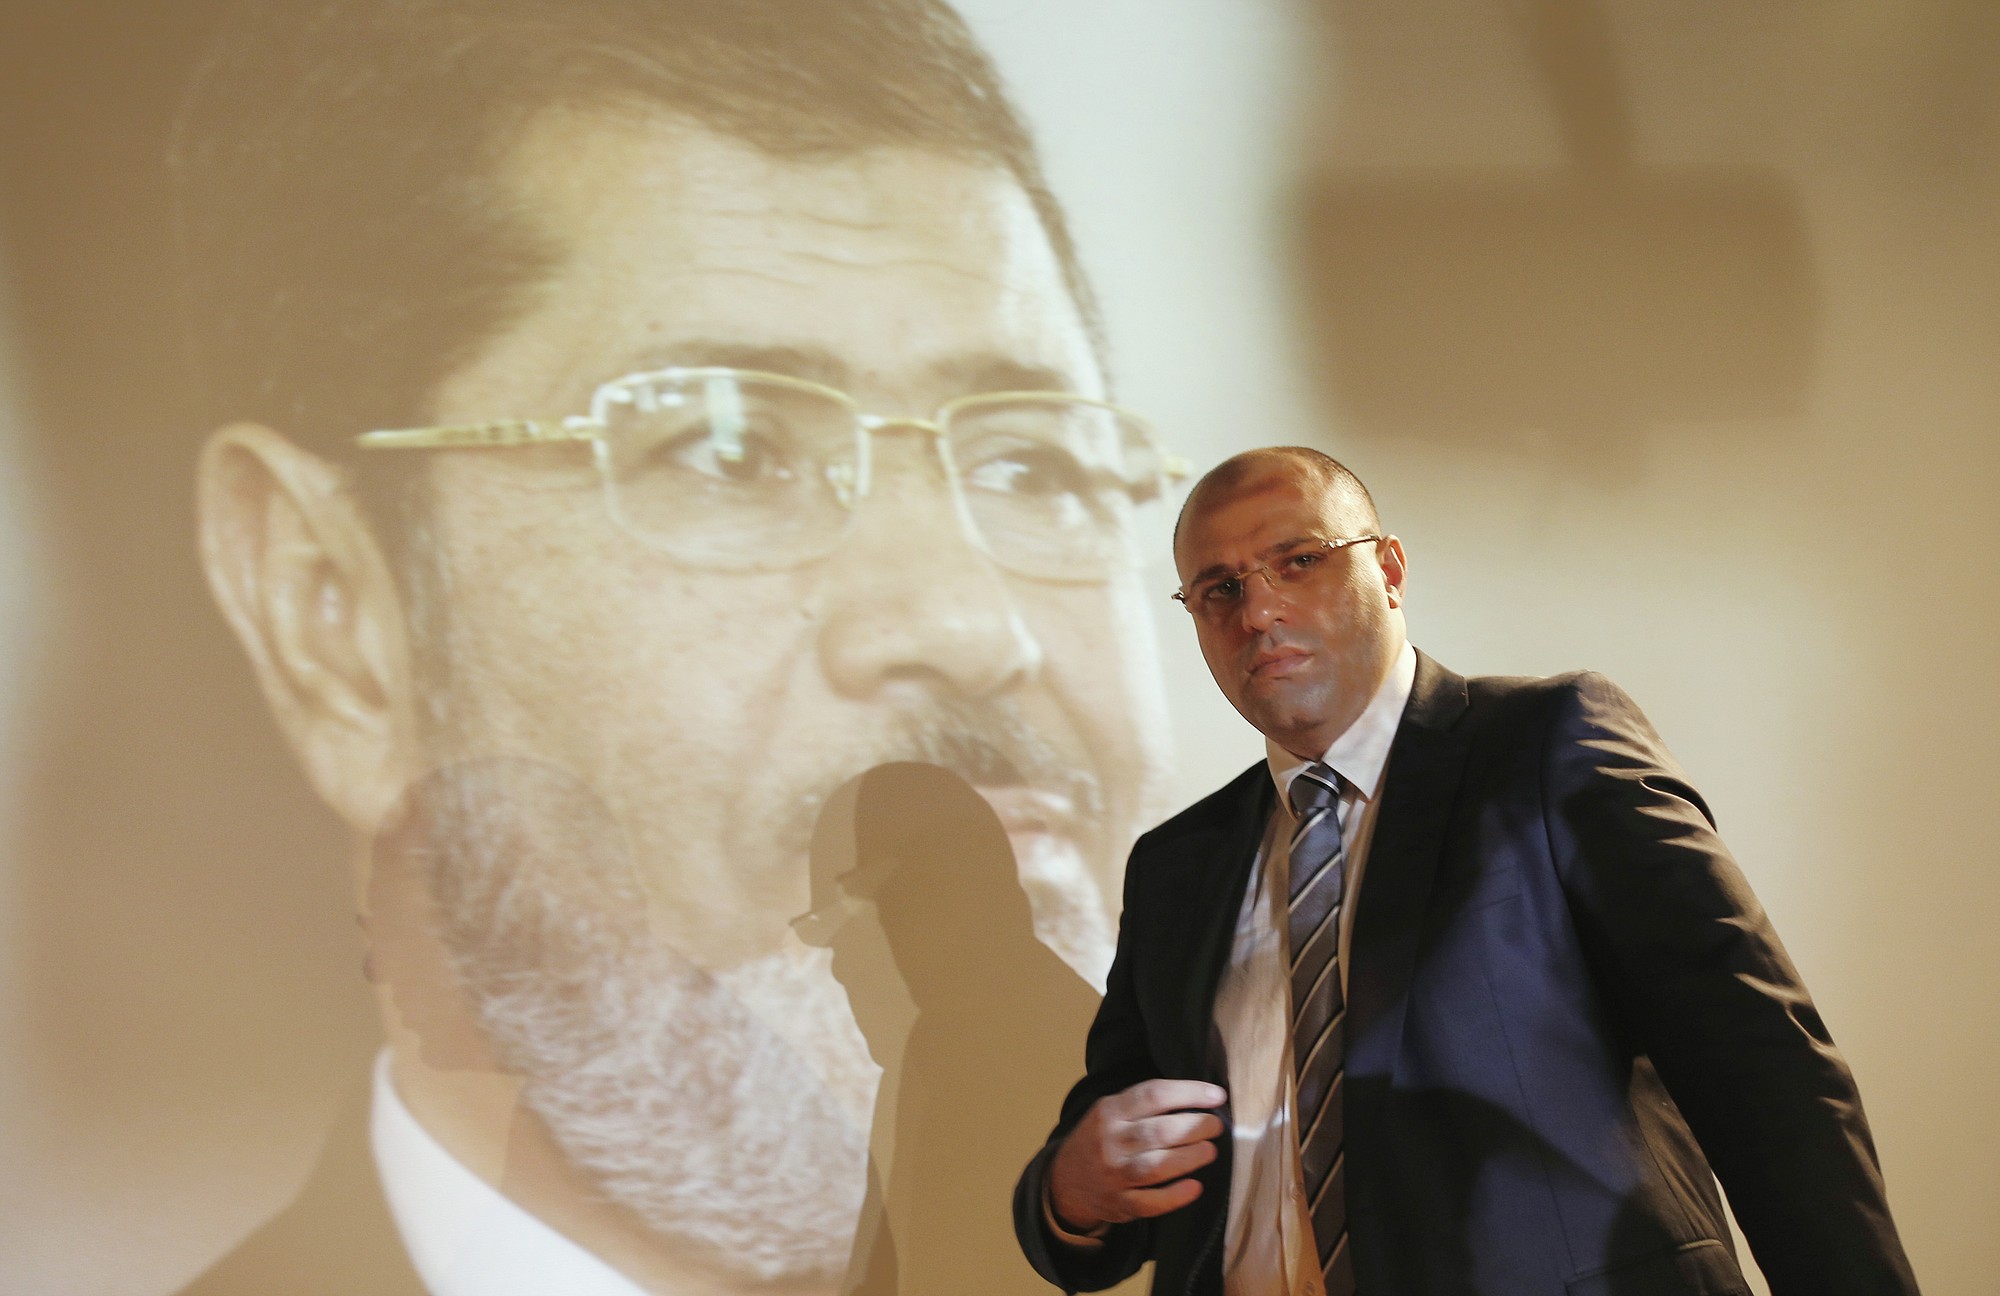 Yehia Hamed, former Investment Minister of ousted Egyptian Islamist President Mohammed Morsi, arrives for a press conference in Istanbul, Turkey, on Tuesday.